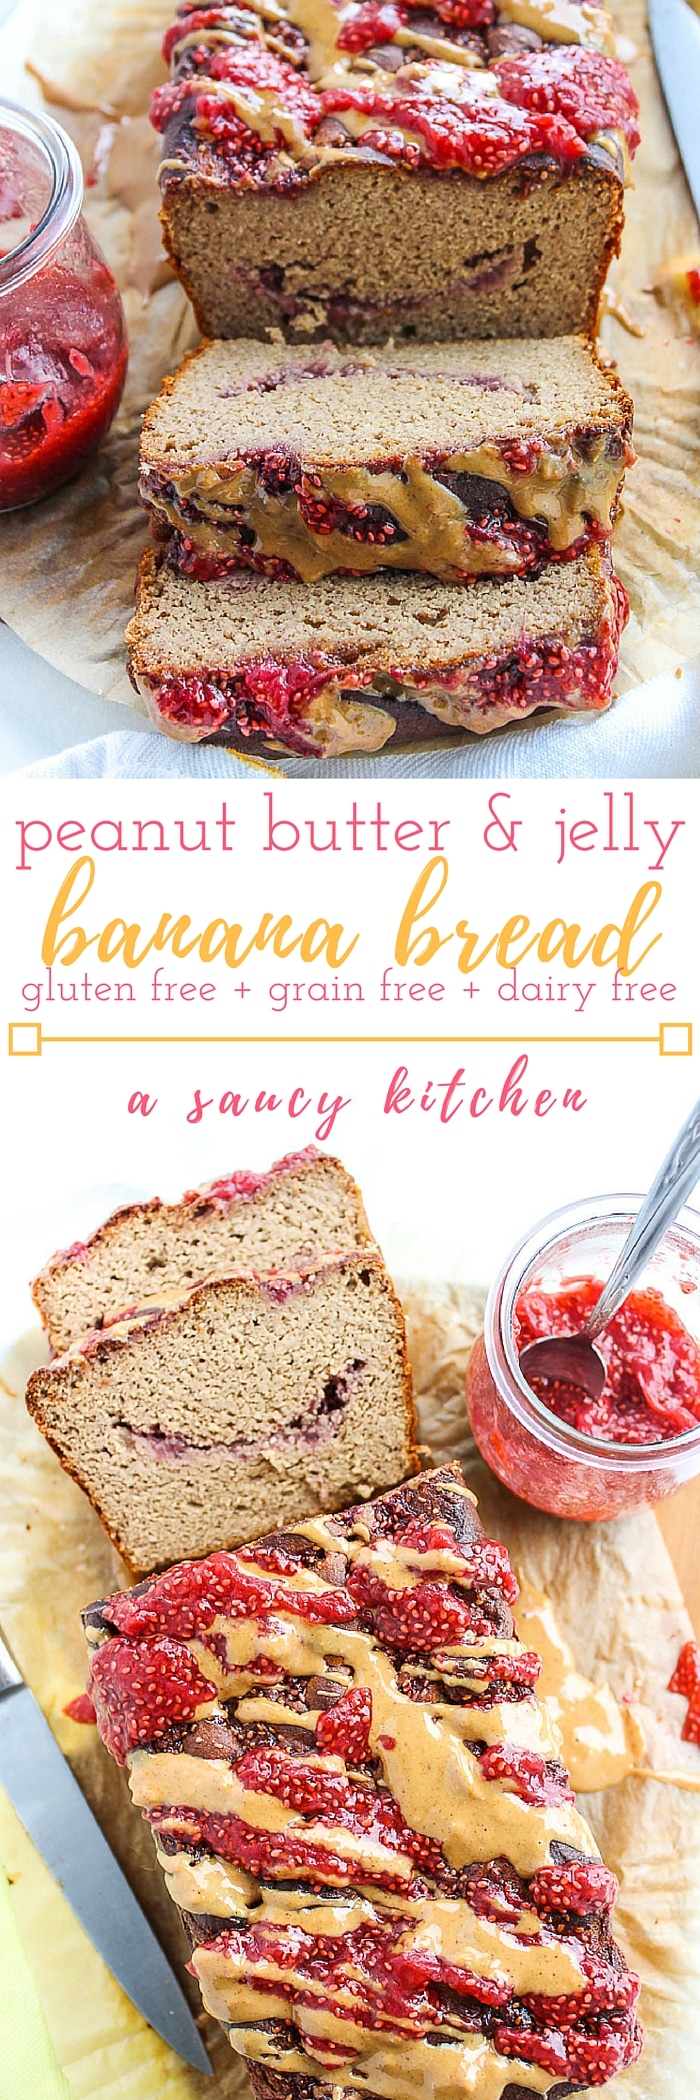 Peanut Butter and Jelly Banana Bread - Swap out the peanut butter for almond butter to make this Paleo friendly | Gluten free, dairy free, & grain free